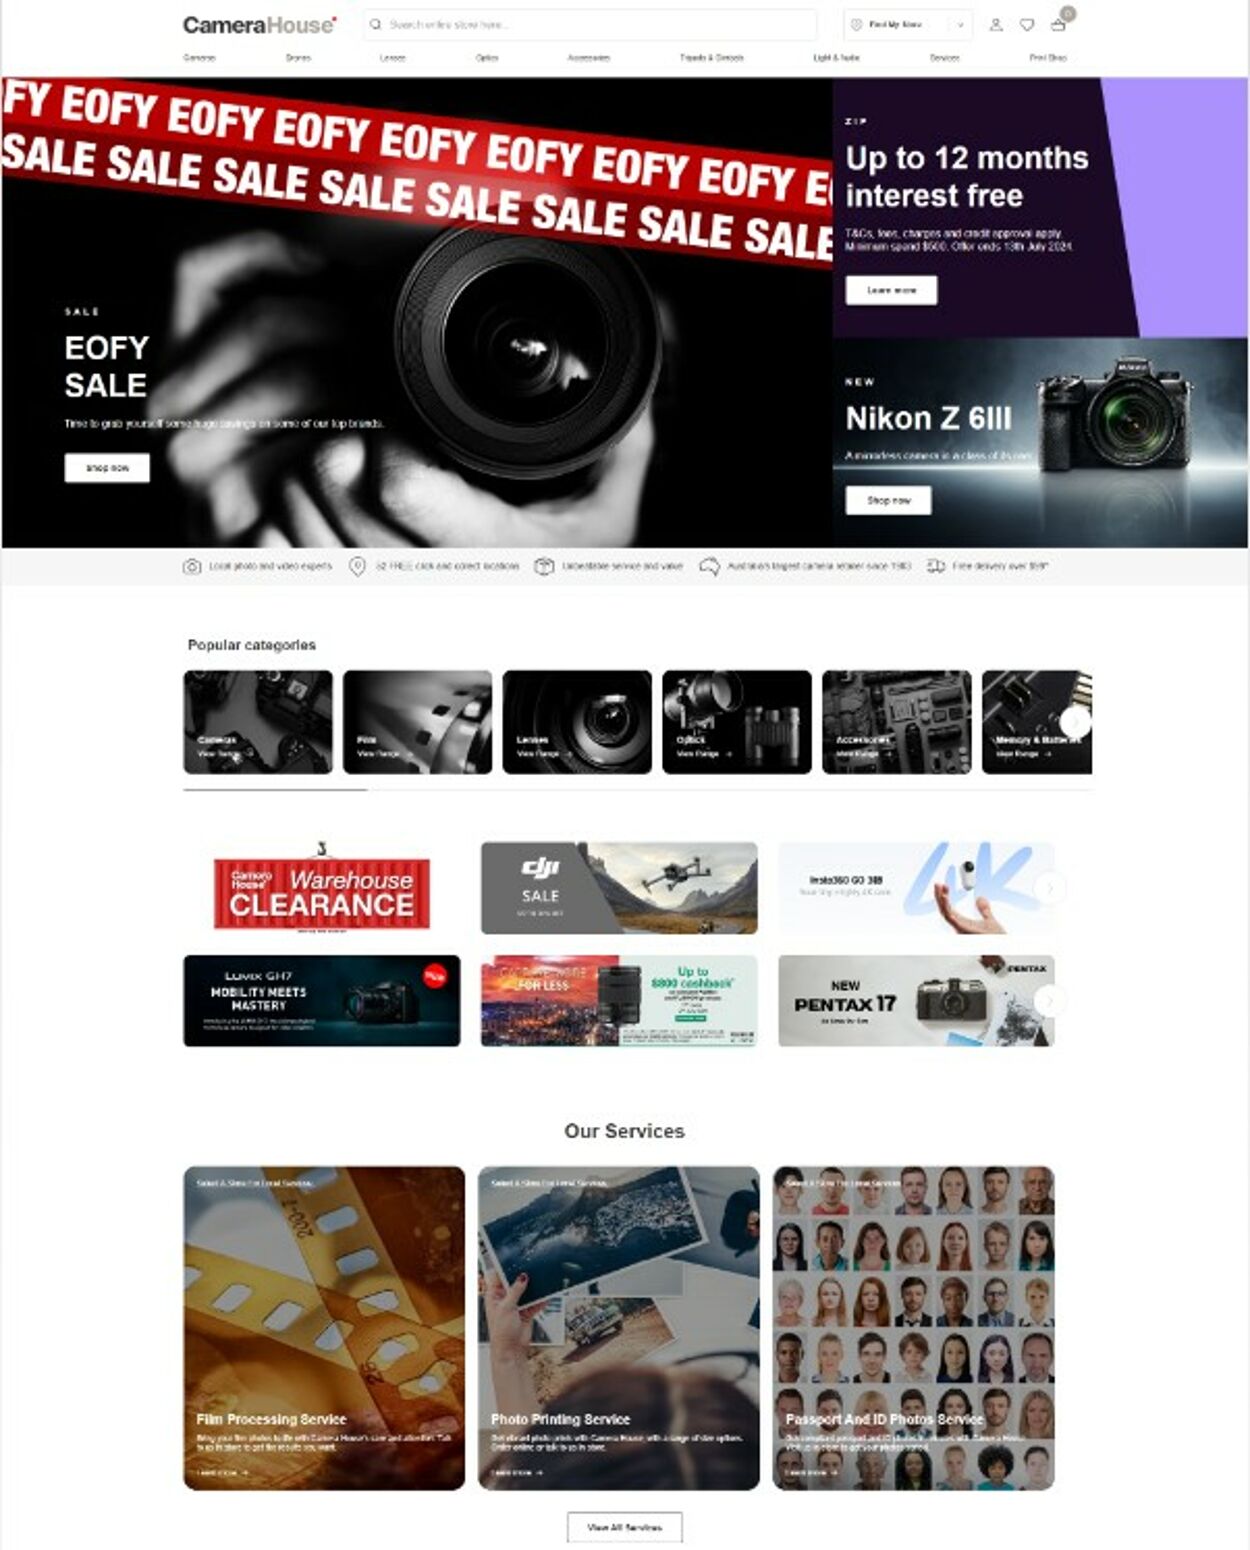 Camera House Promotional catalogues